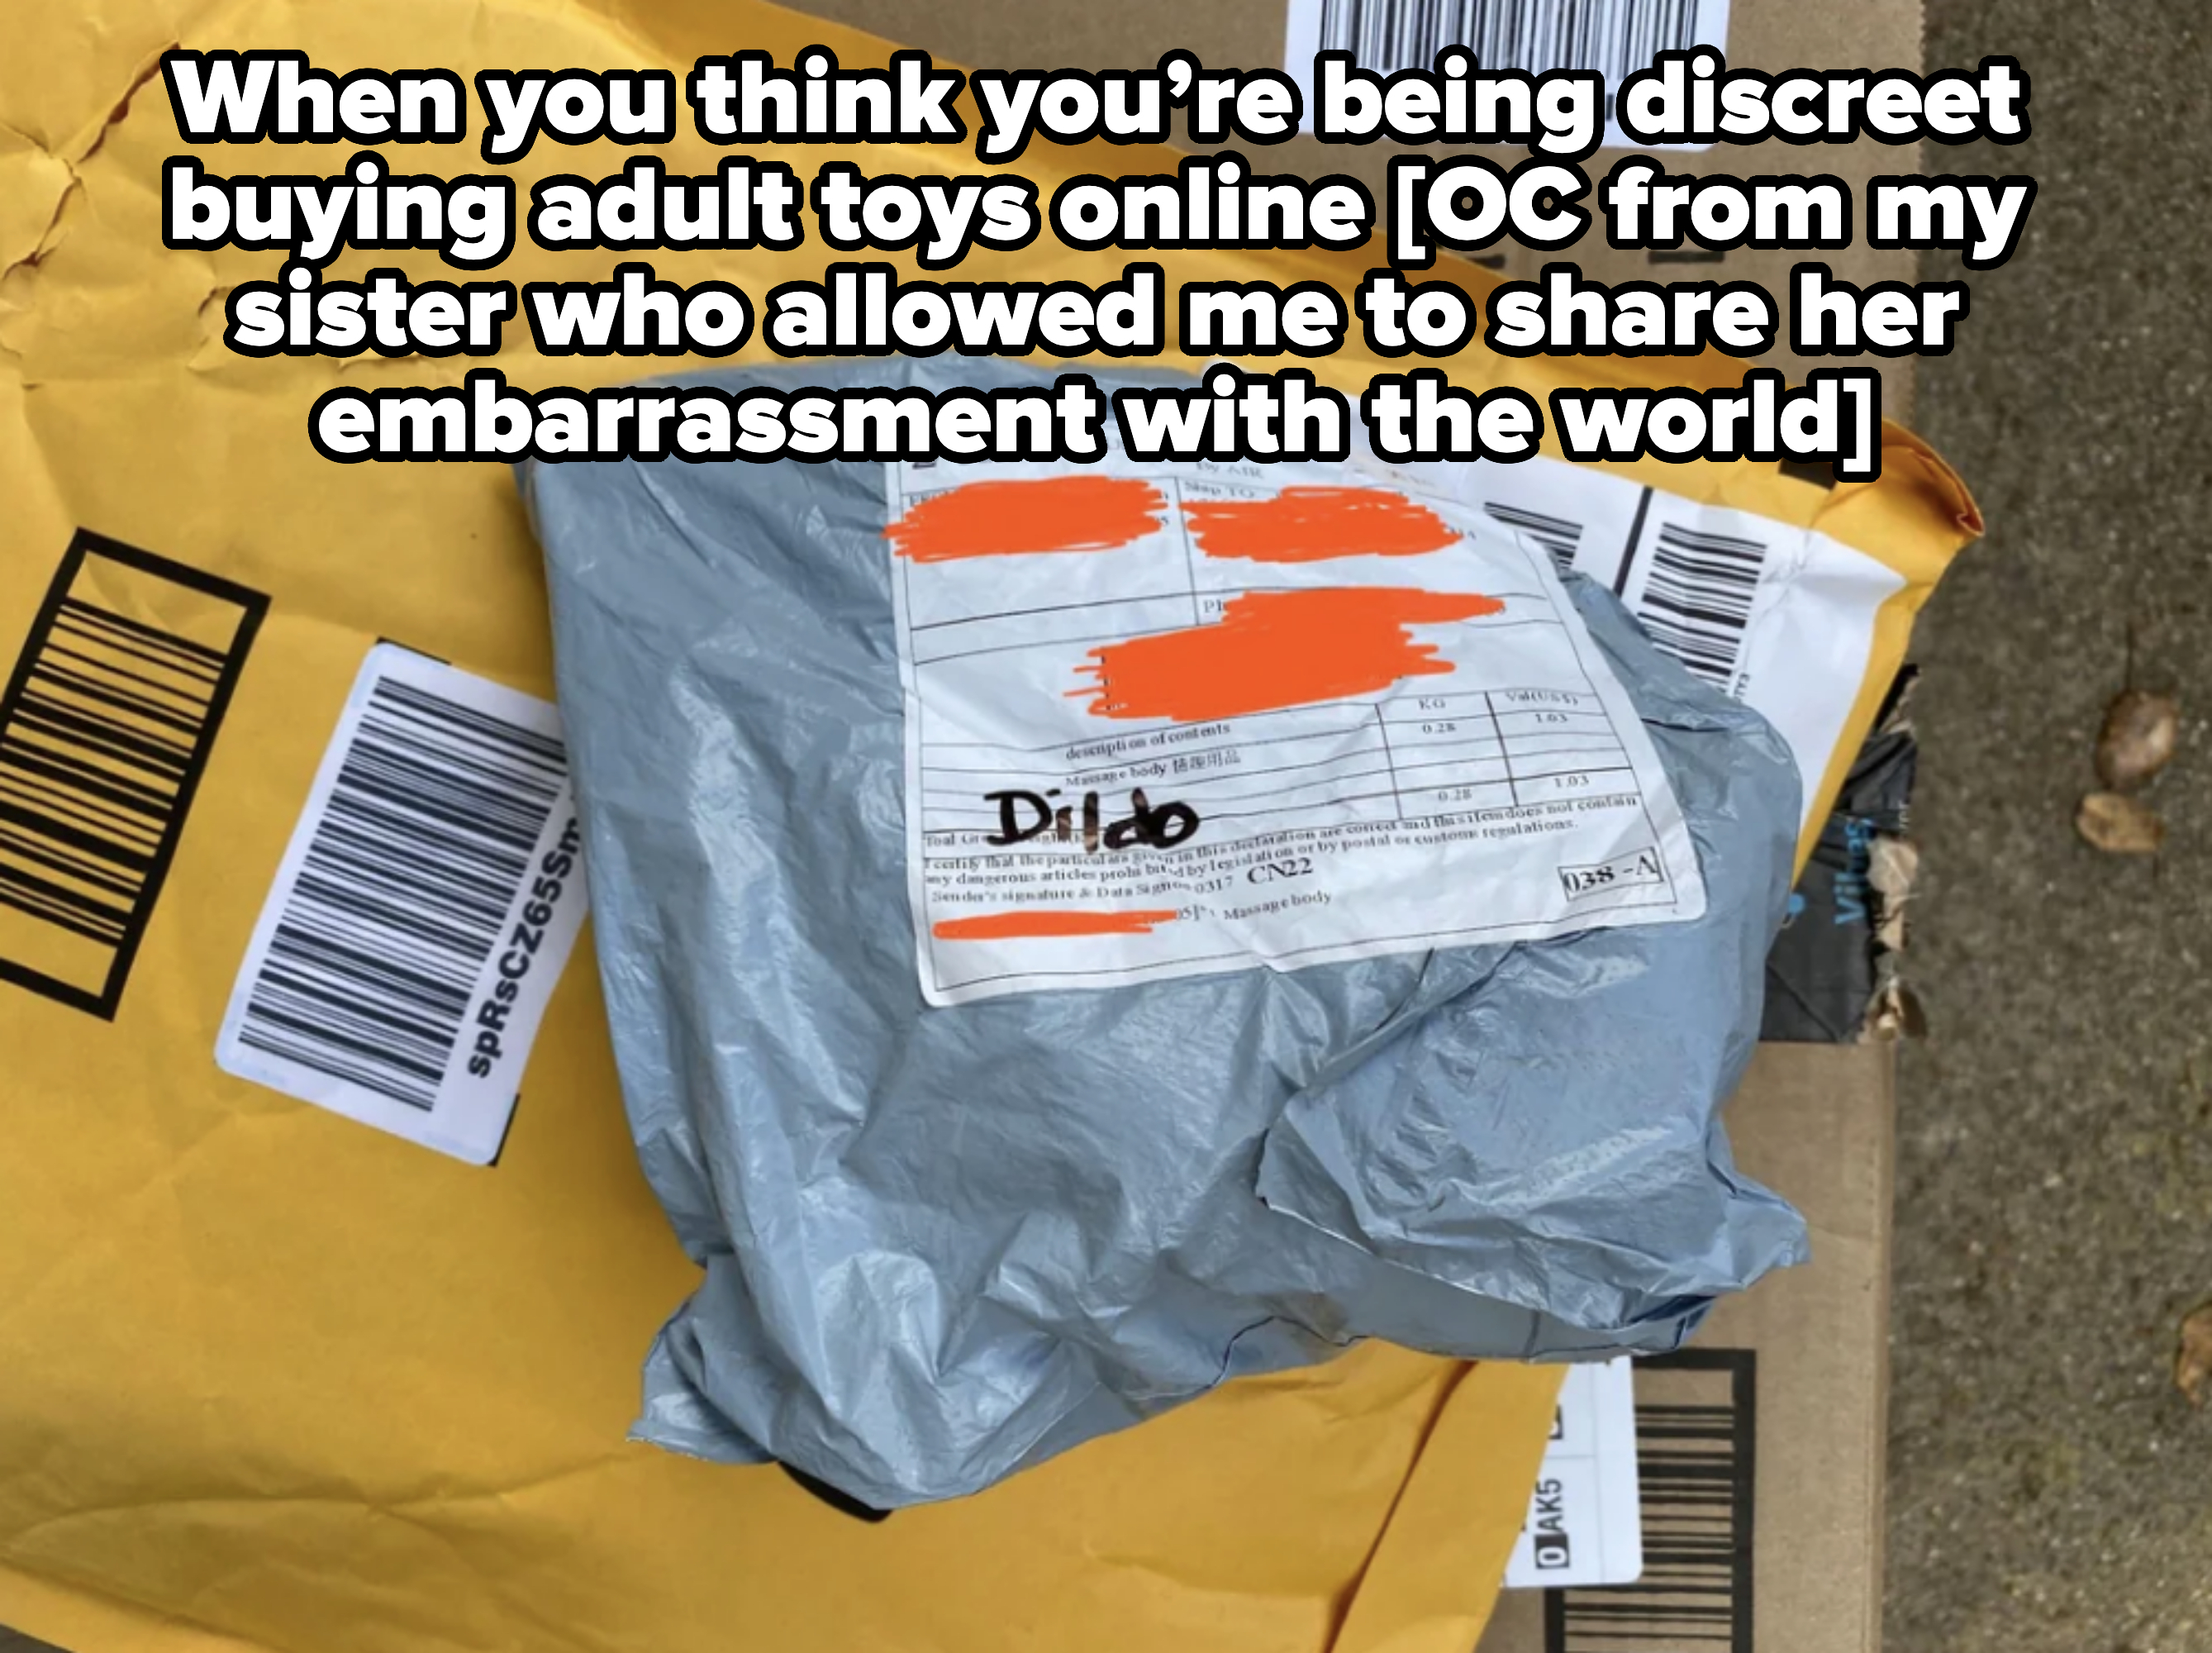 A package with a labeled customs form, partially covered, showing the word &quot;Dildo.&quot; The package is atop another unopened envelope on a concrete surface